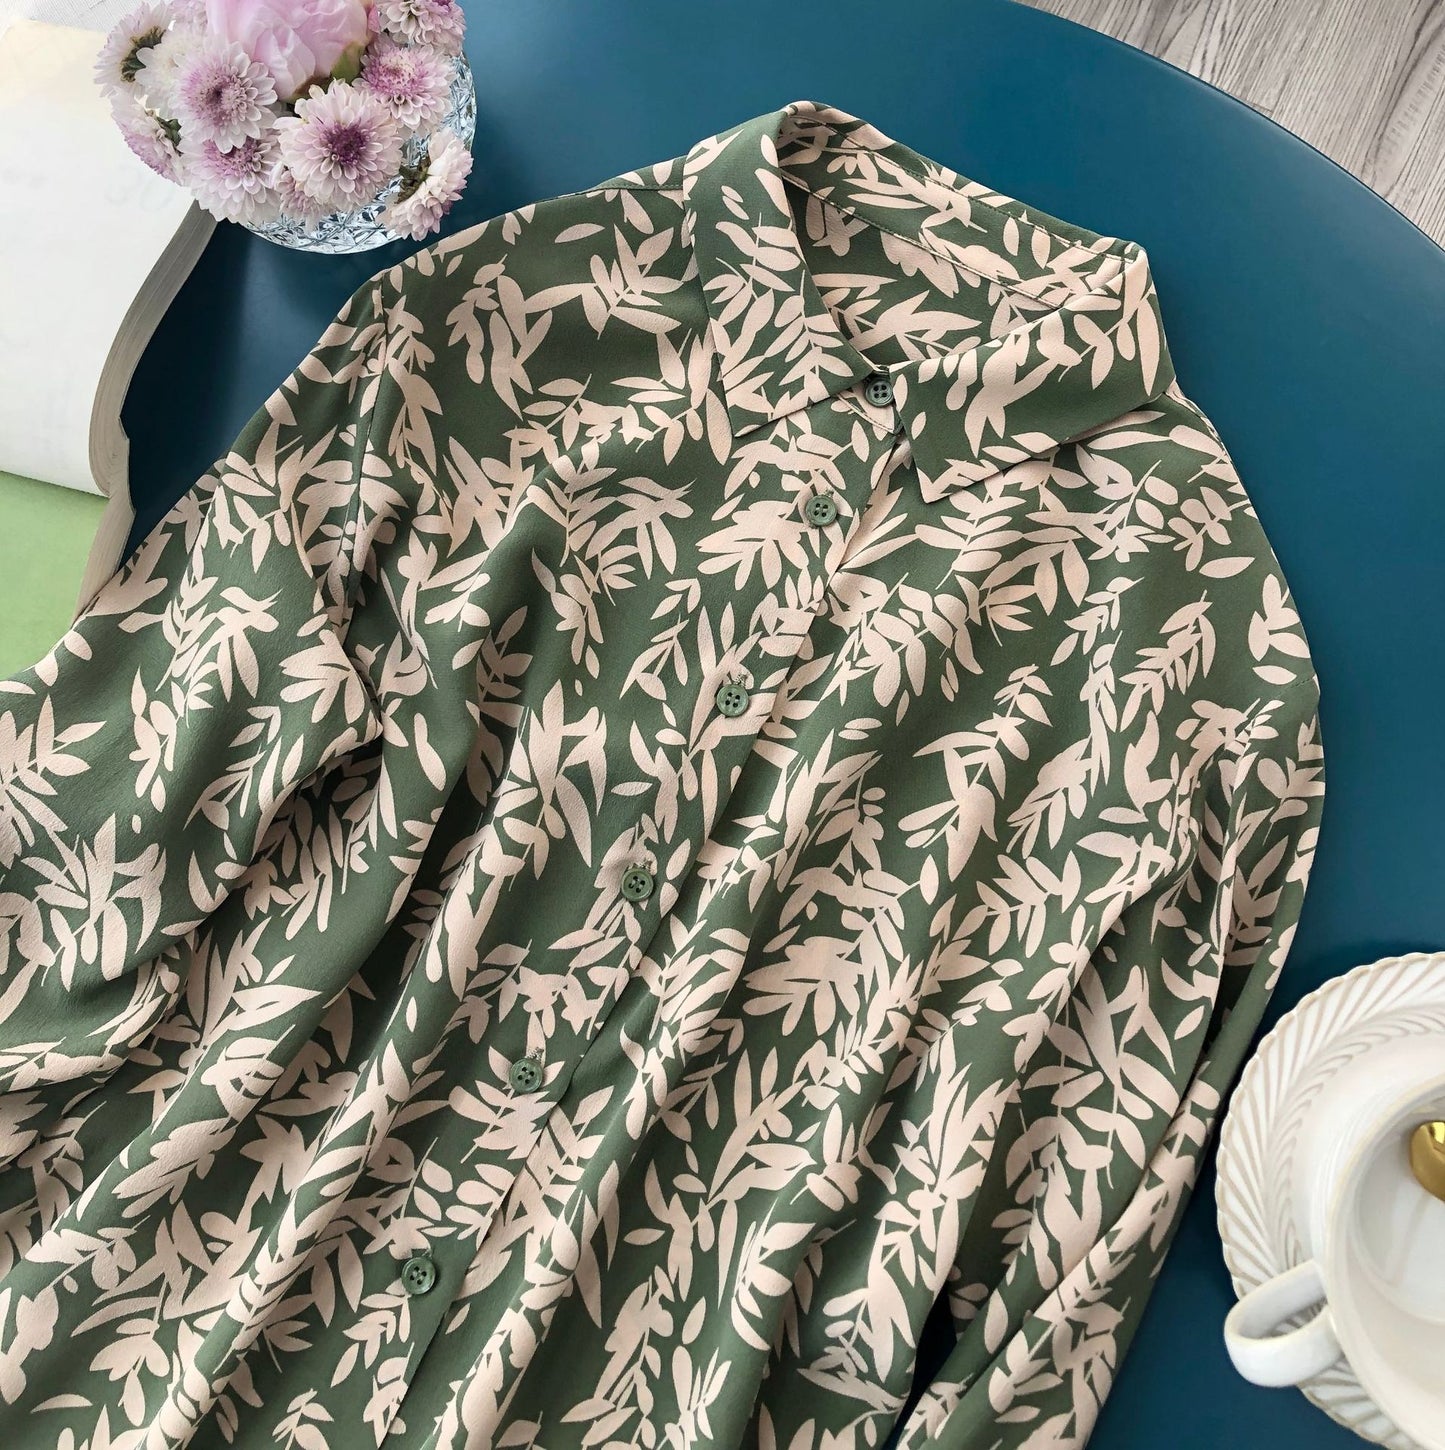 Sandwashed Silk Long-Sleeved Shirt with Fresh Bamboo Leaf Print in Southern French Style for a Leisurely and Elegant Look